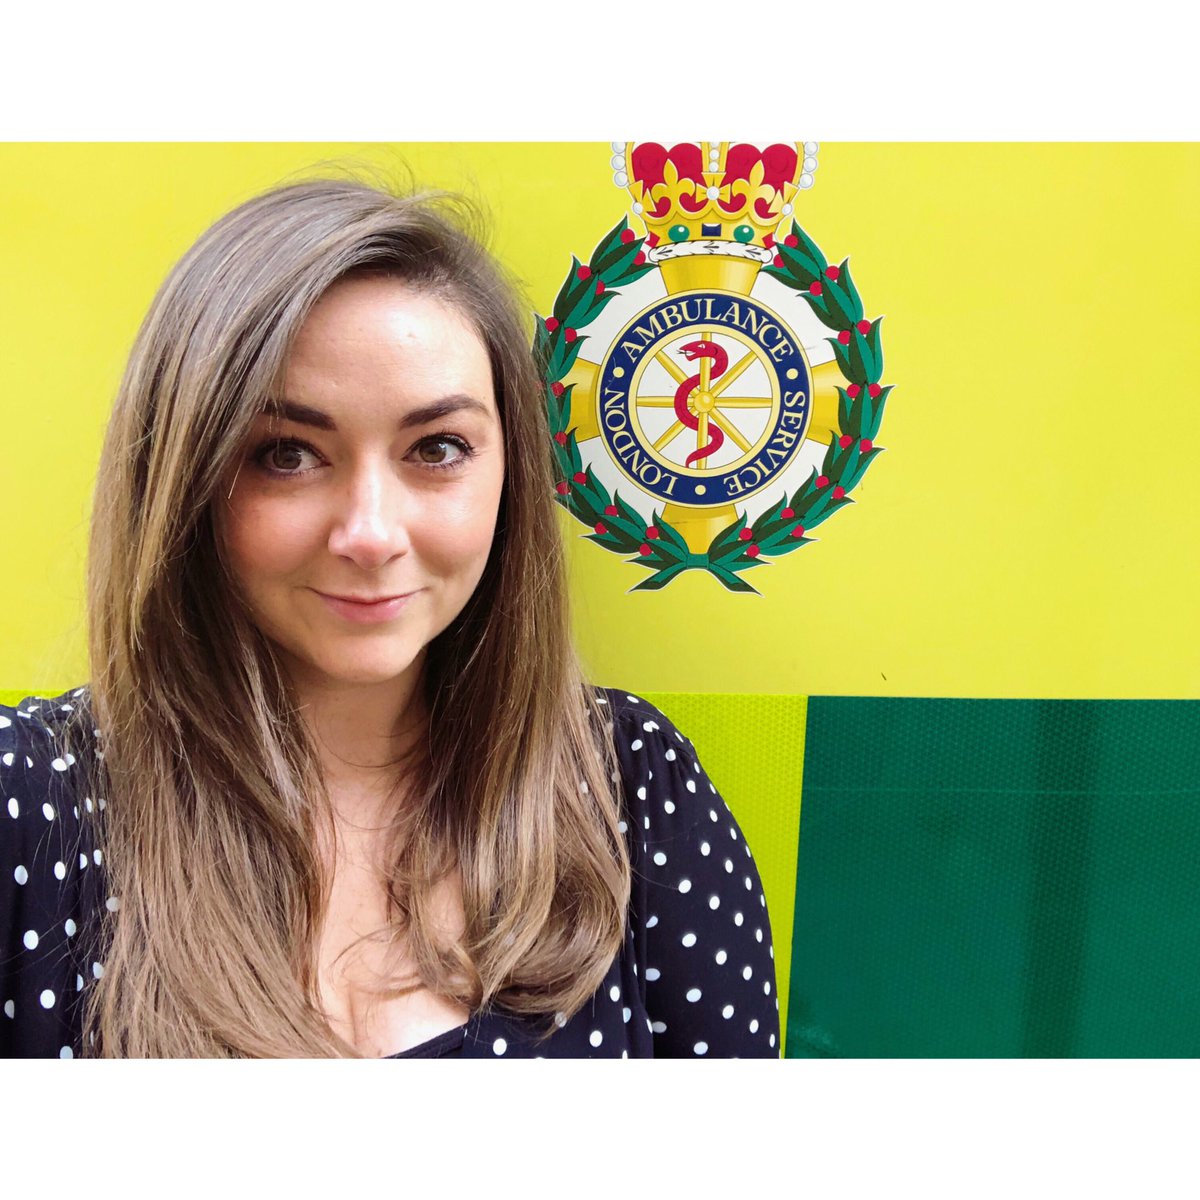 Back! 🚑🚨 #NotanAprilFools

Excited to be ambulancing with @Ldn_Ambulance again in a brand new role as Digital Content and Communications Manager. Bring it on!